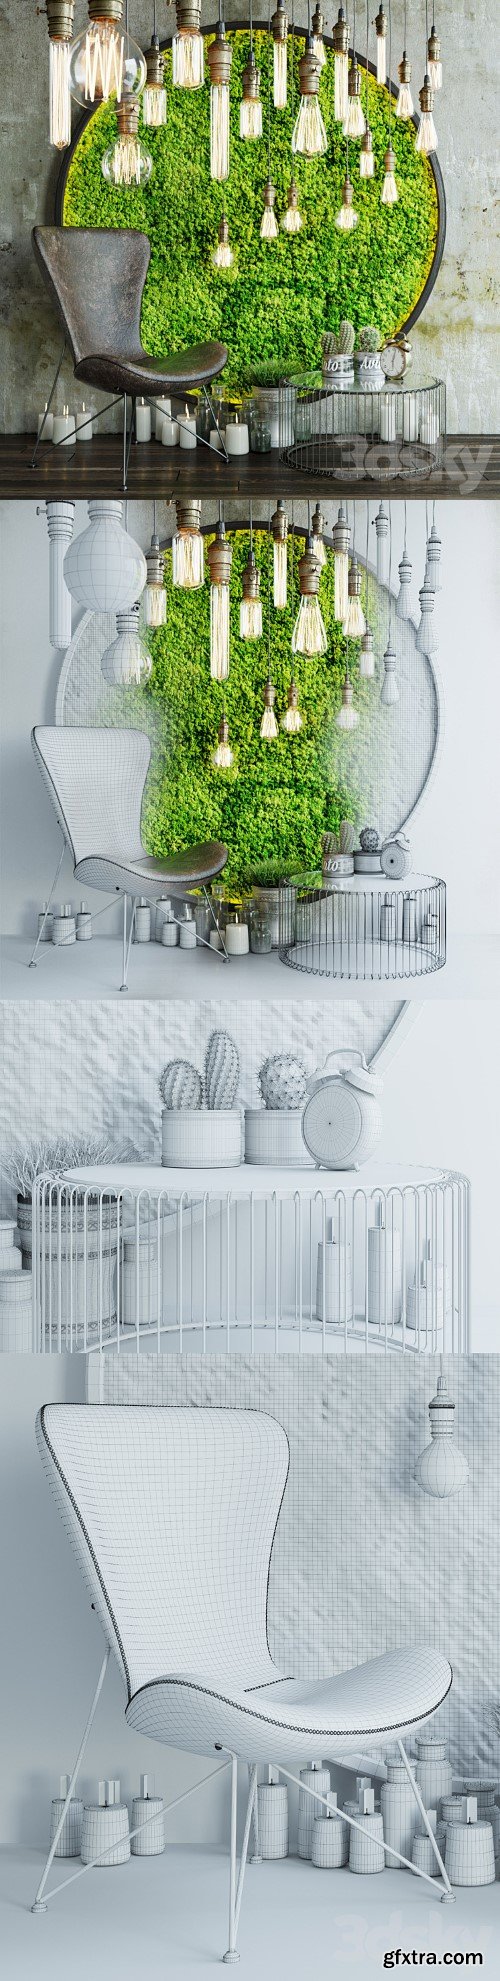 Decor set with moss and lamps